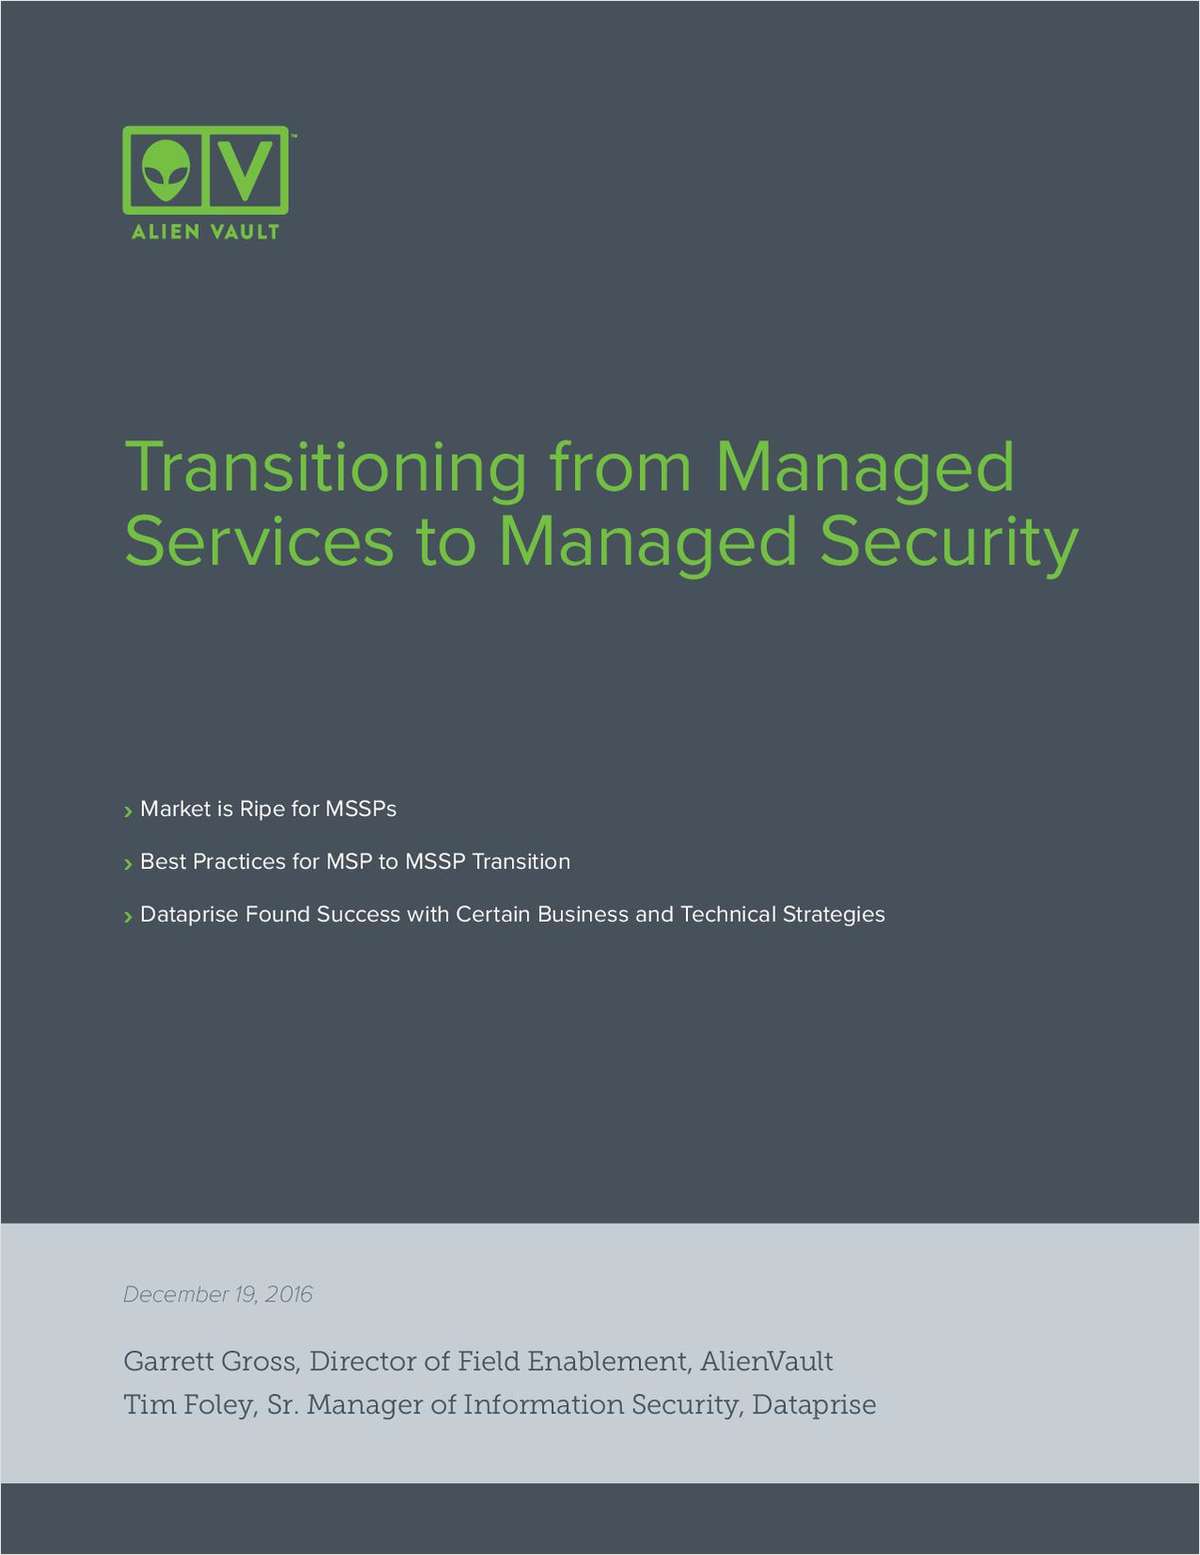 Transitioning from Managed Services to Managed Security